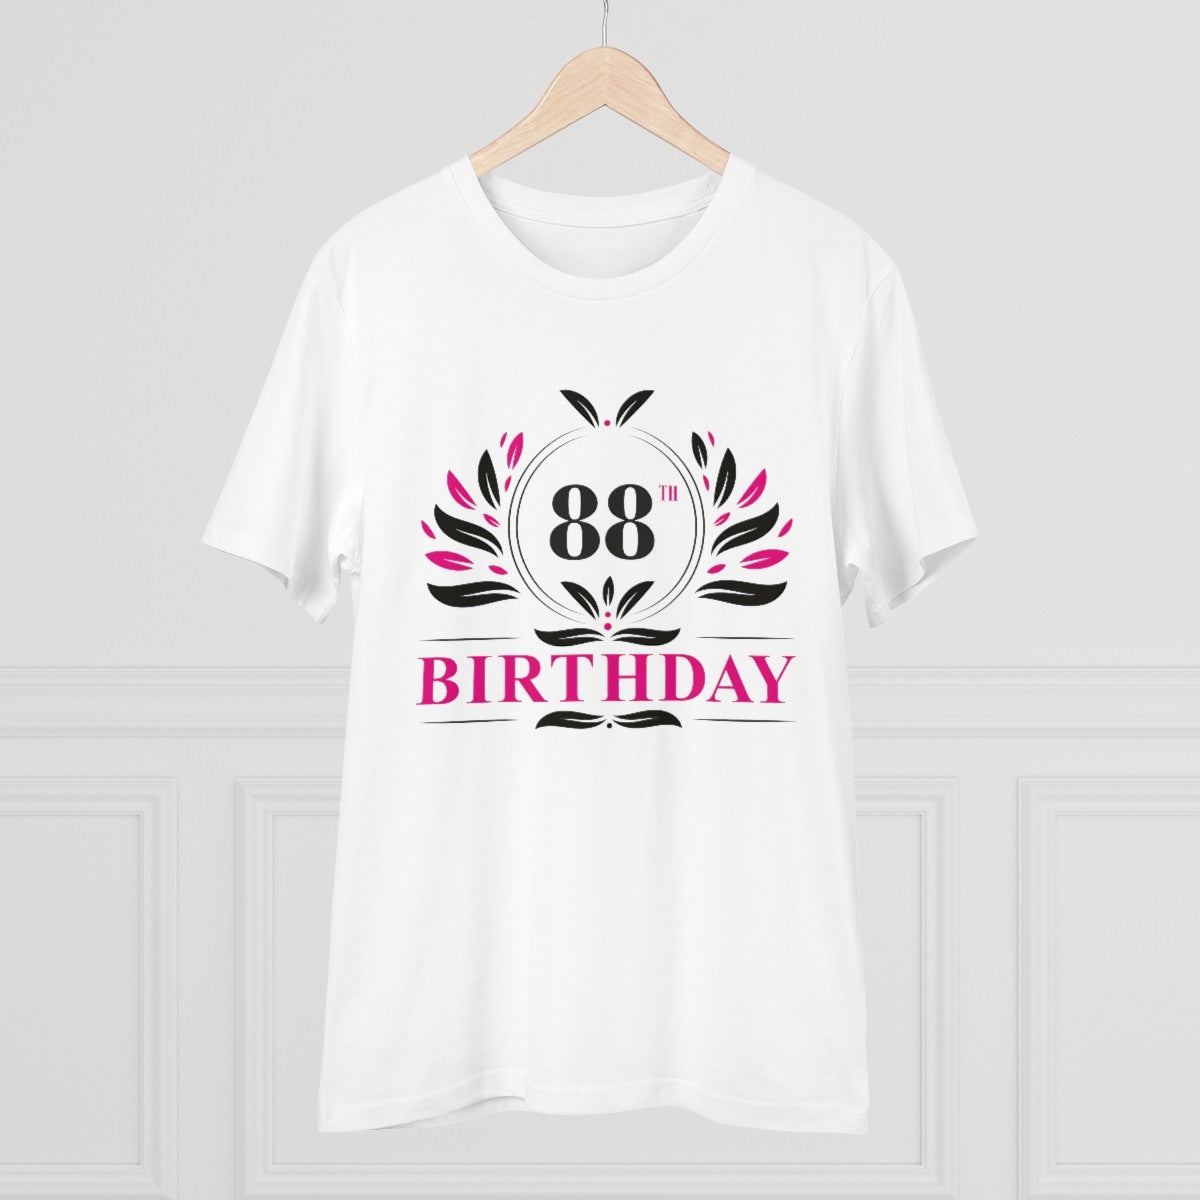 Men's PC Cotton 88th Birthday Printed T Shirt (Color: White, Thread Count: 180GSM) - GillKart